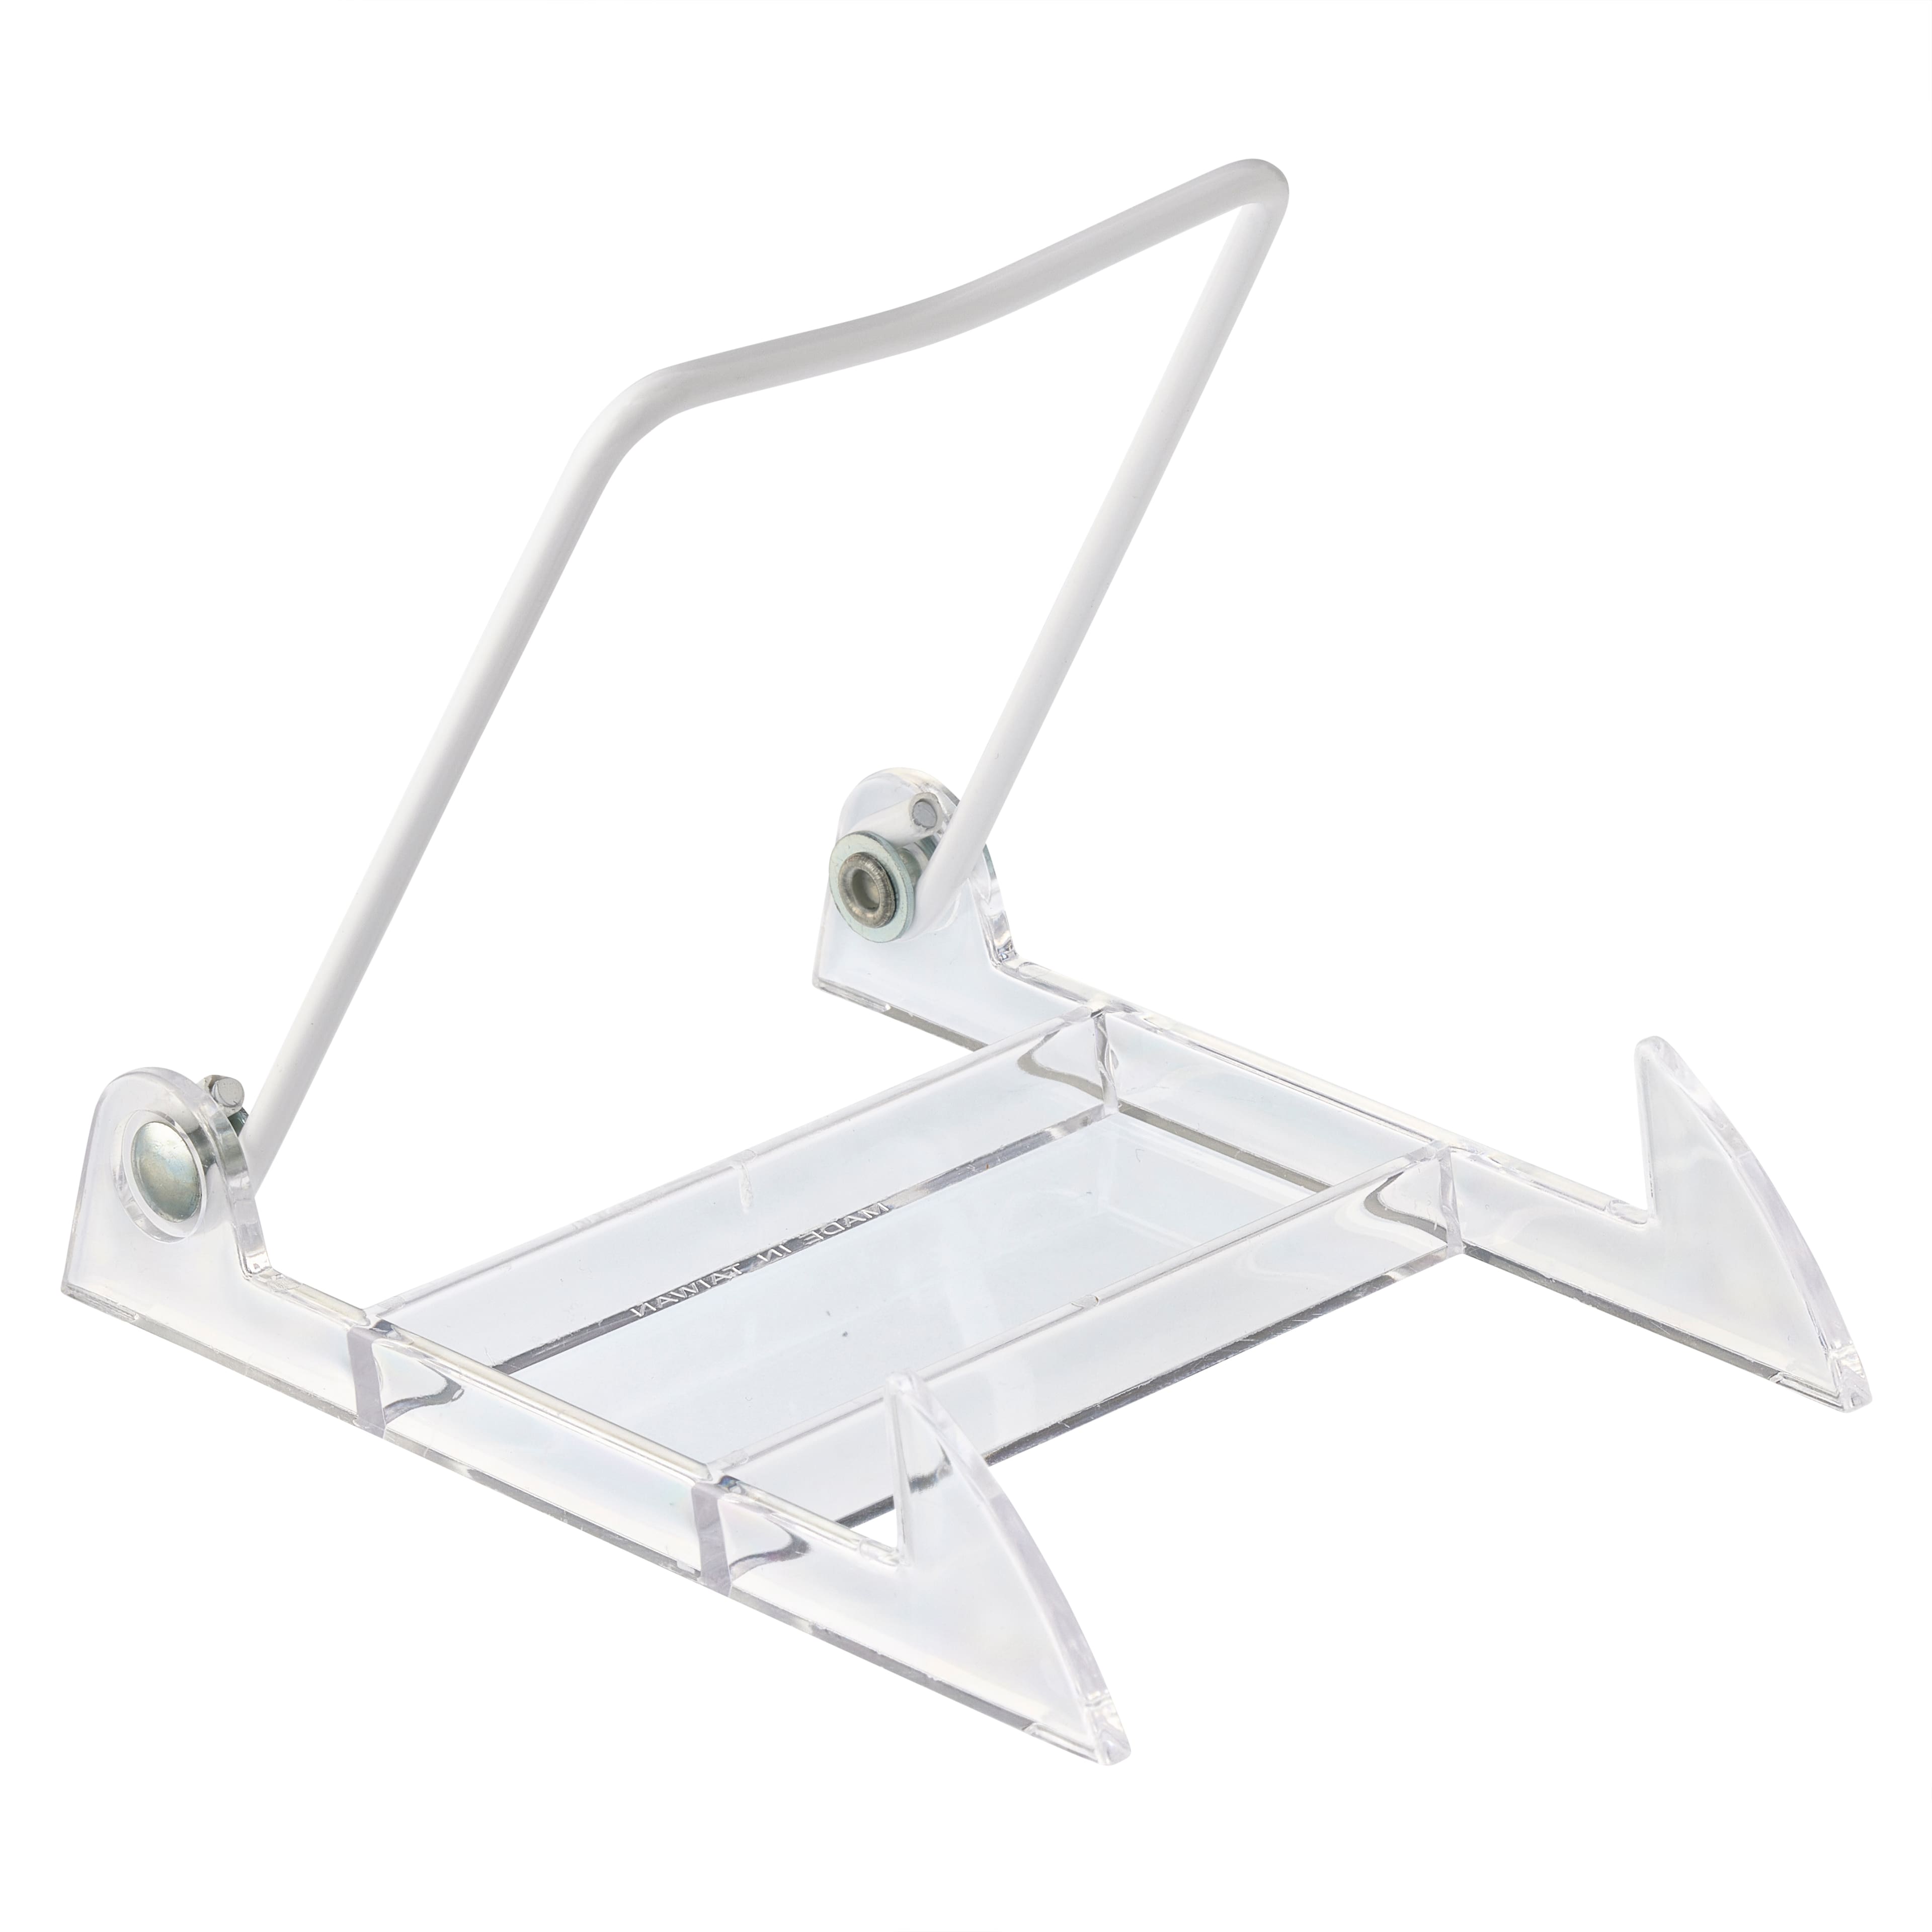 Folding Easel With Clear Base By Studio D&#xE9;cor&#xAE;